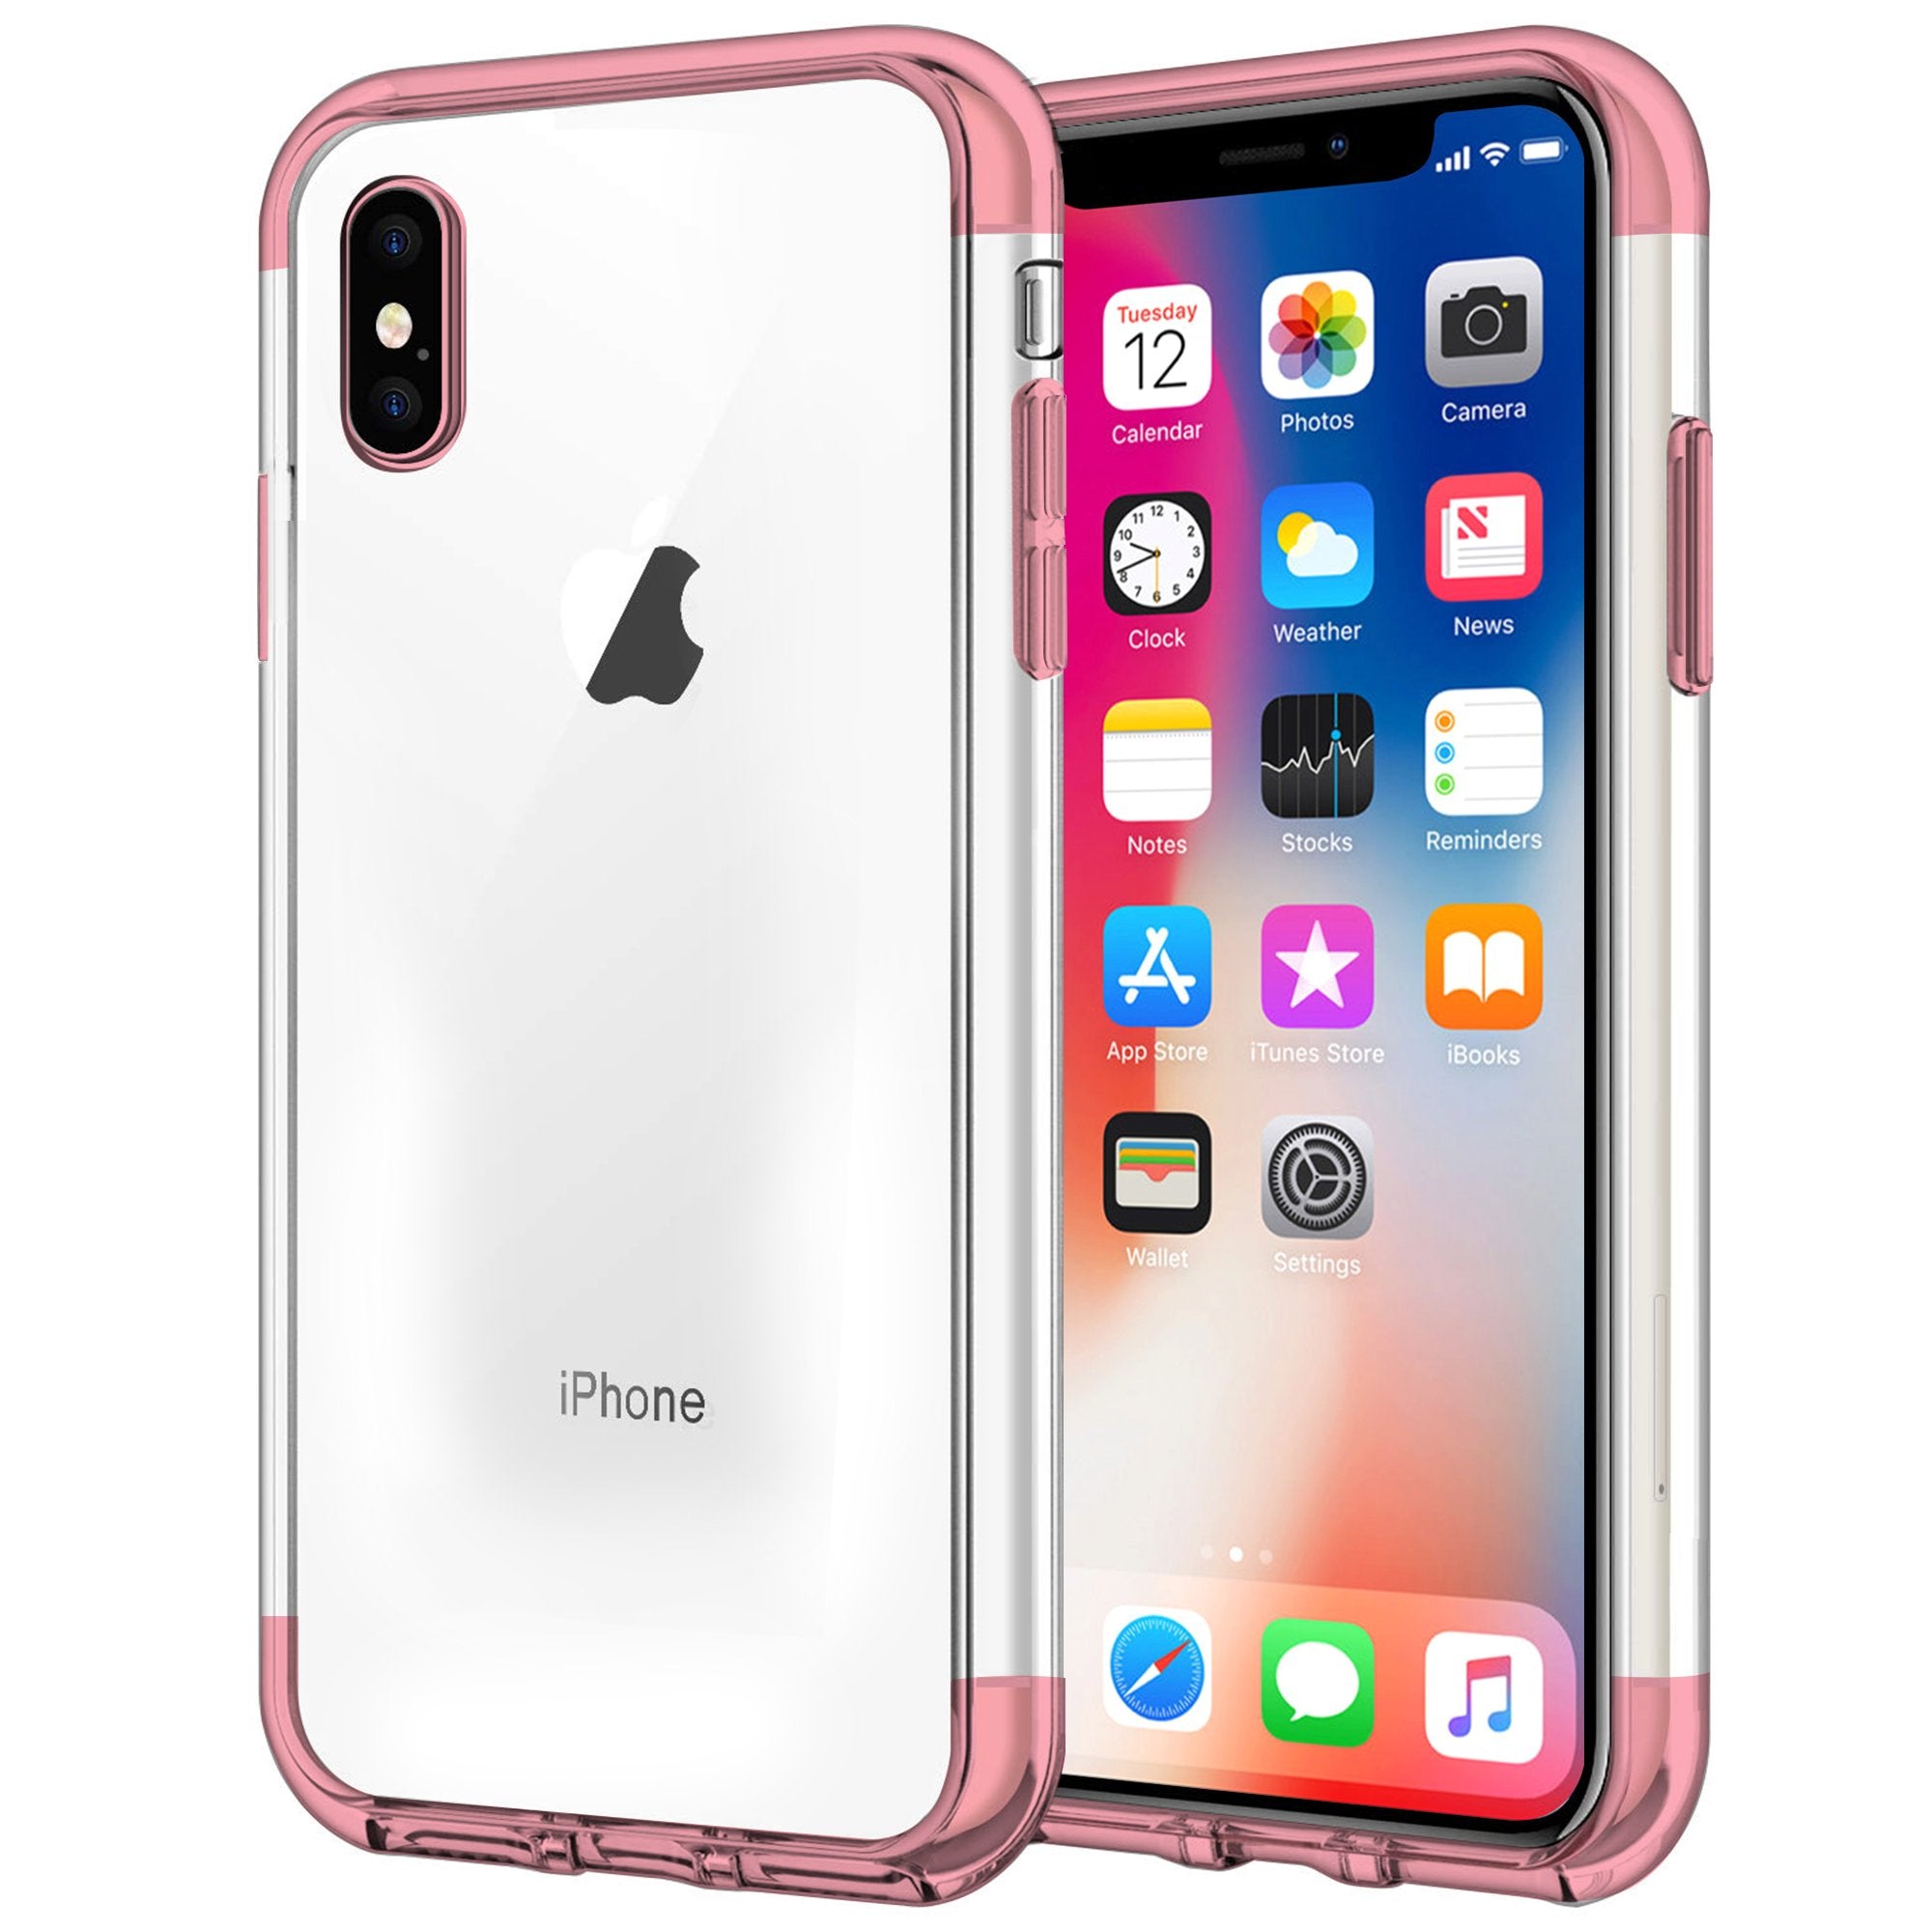 Case for iPhone X Shock Proof Soft TPU Silicone Phone Clear Slim Cover